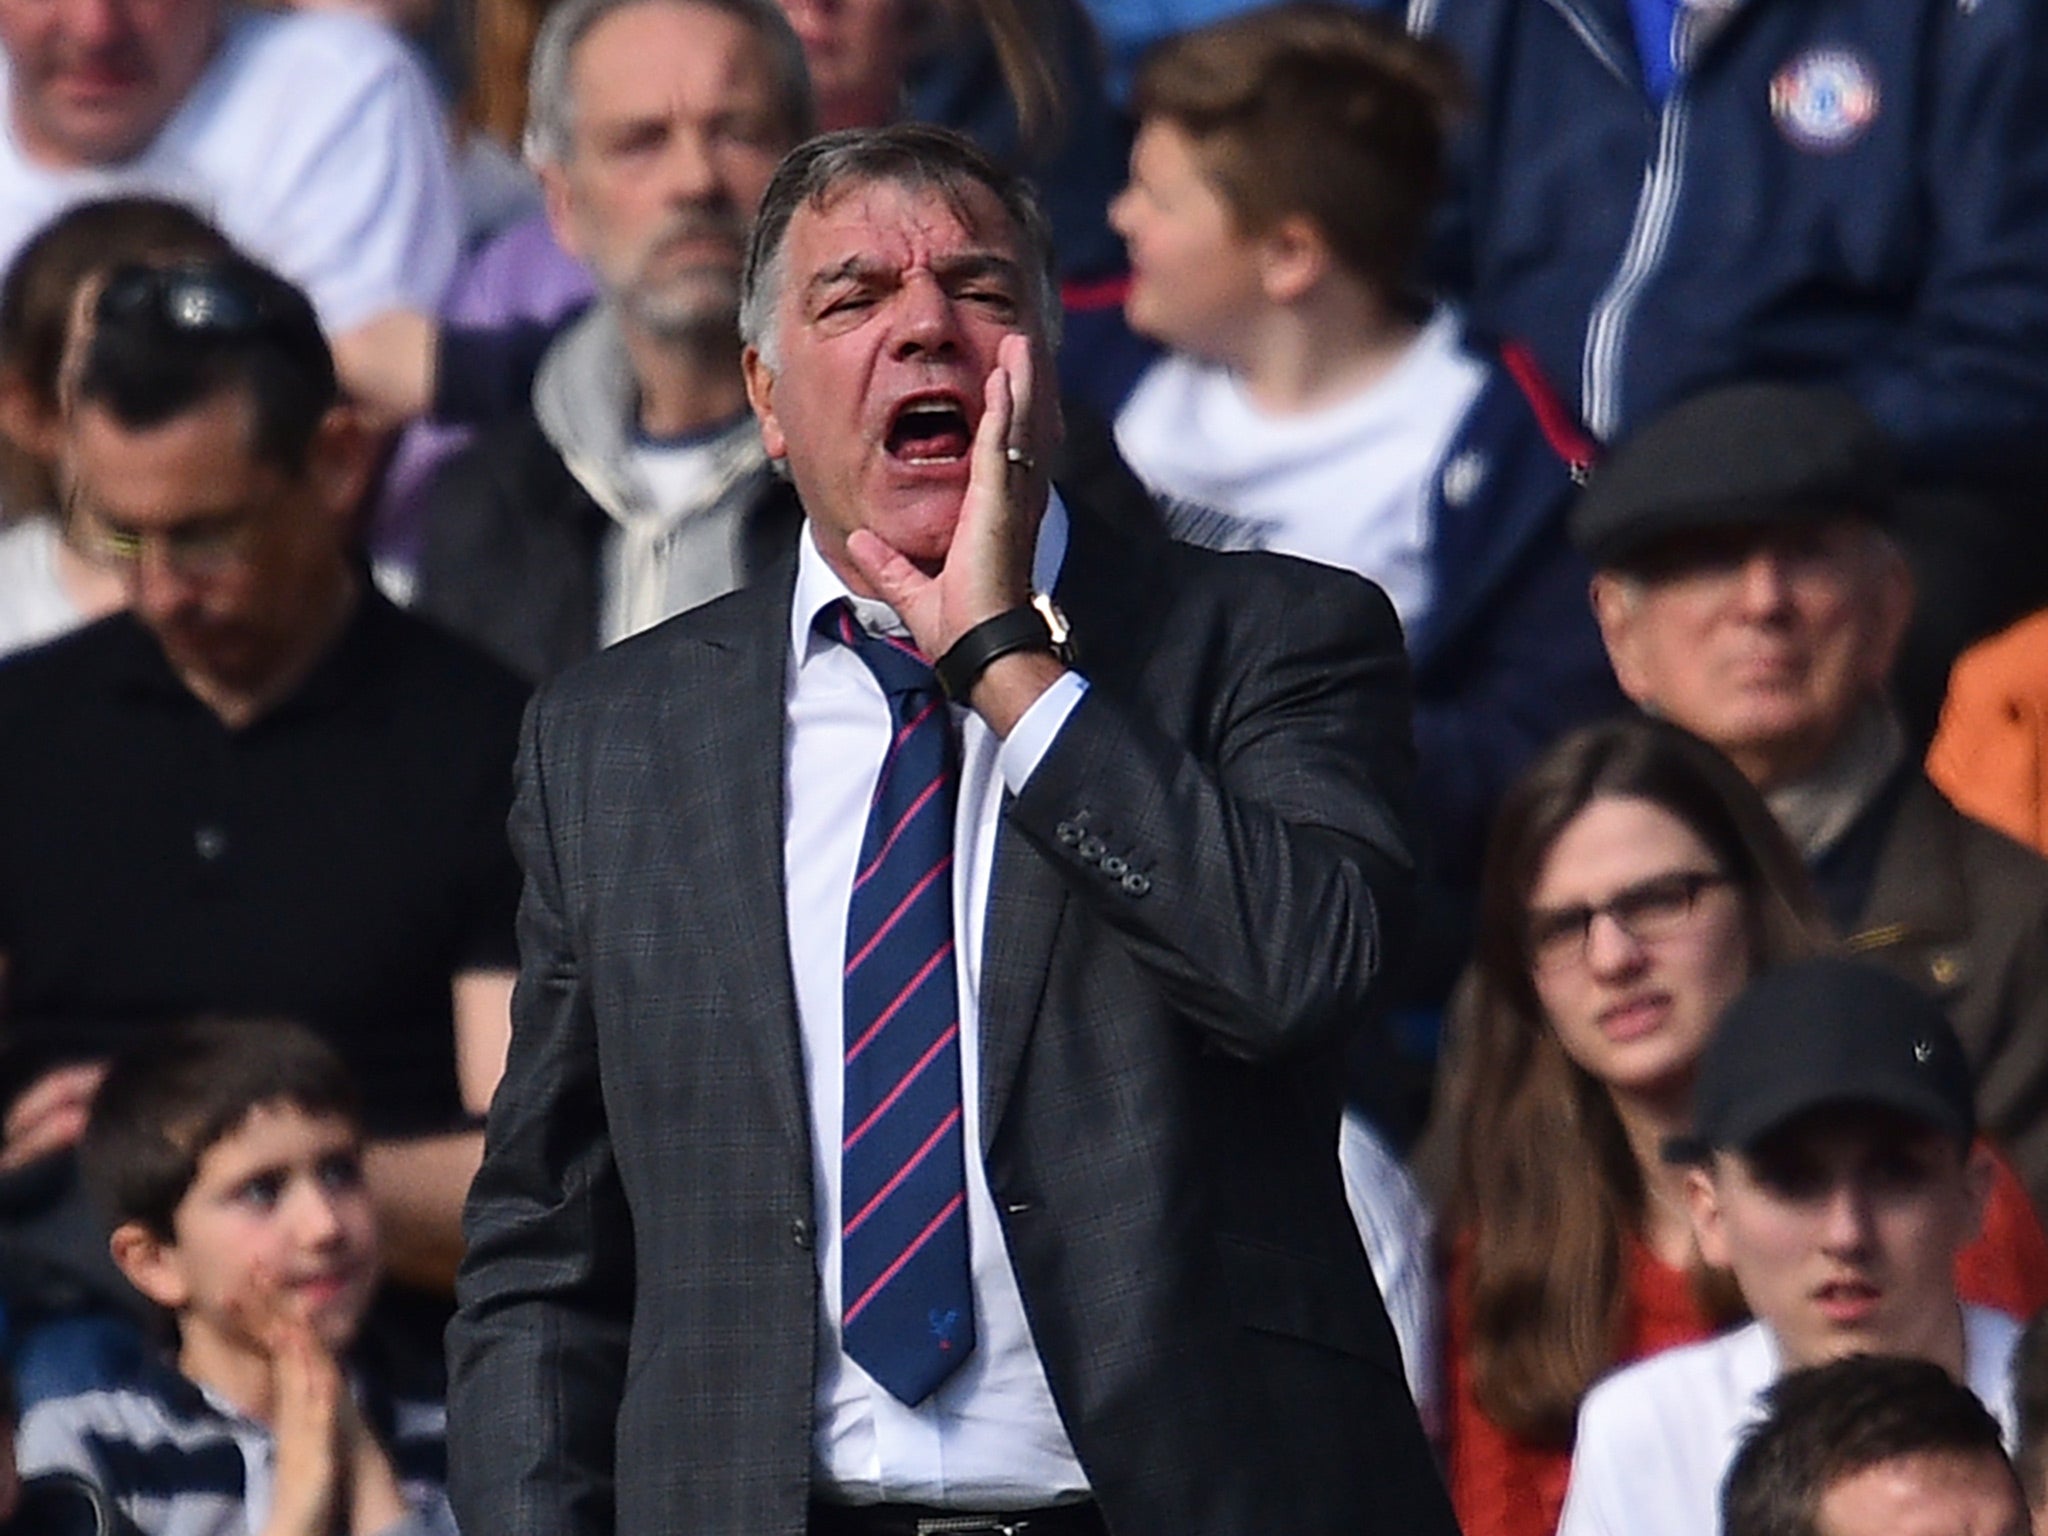 Sam Allardyce was impressed with his players' grit and determination